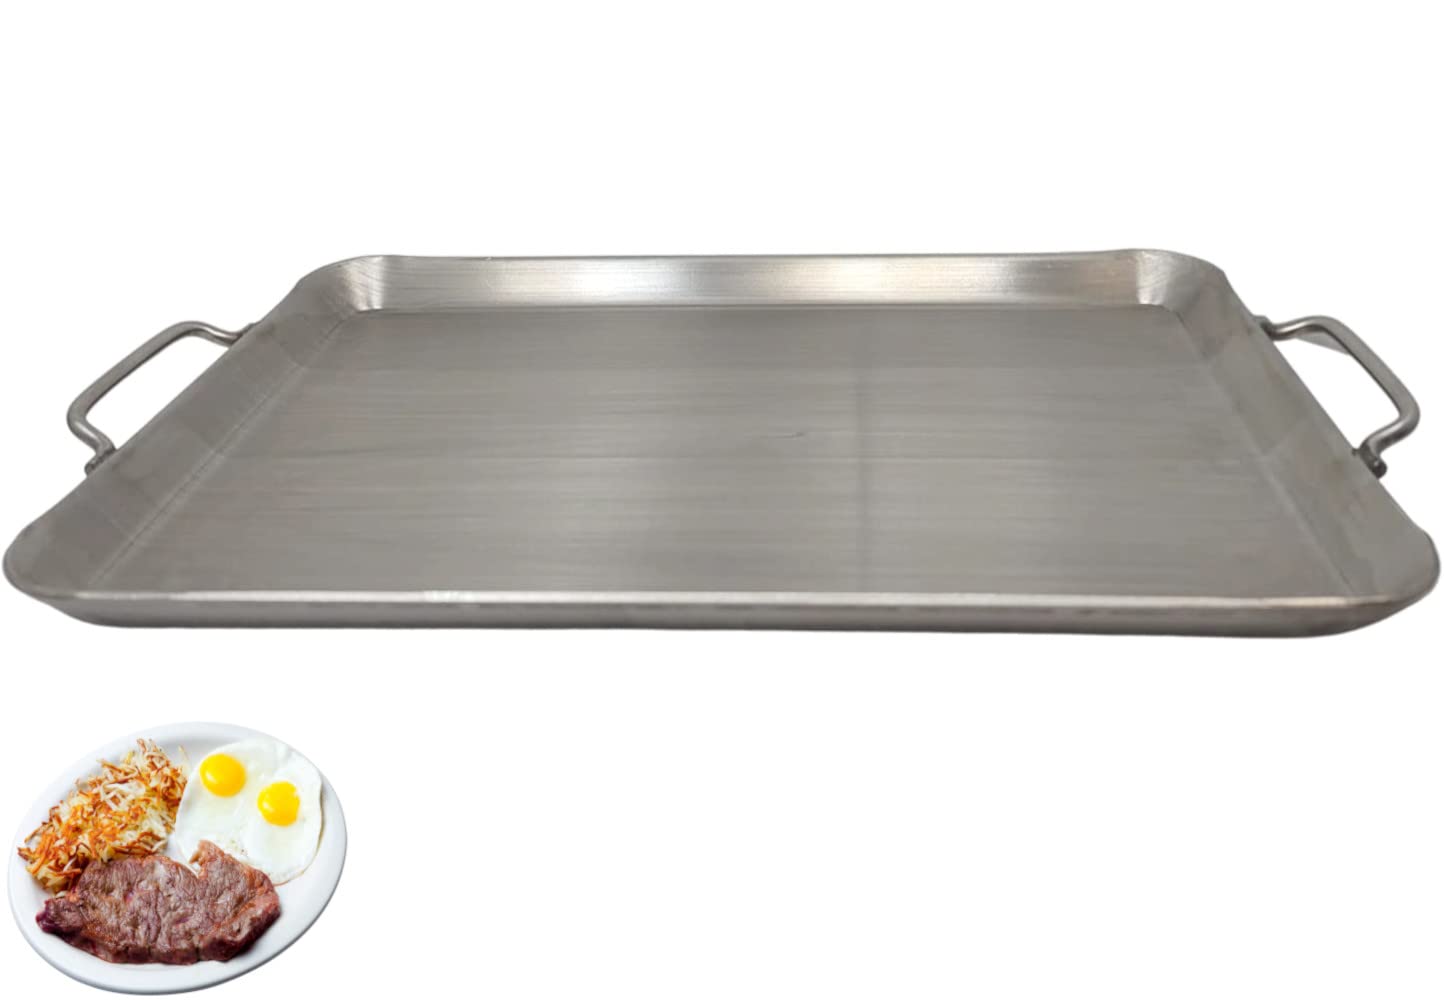 Professional Stove Top Griddle TRI-PLY Stainless Steel For Gas Electric Induction Stovetop Oven & Outdoor Barbecue Safe - 18" x 11.5"